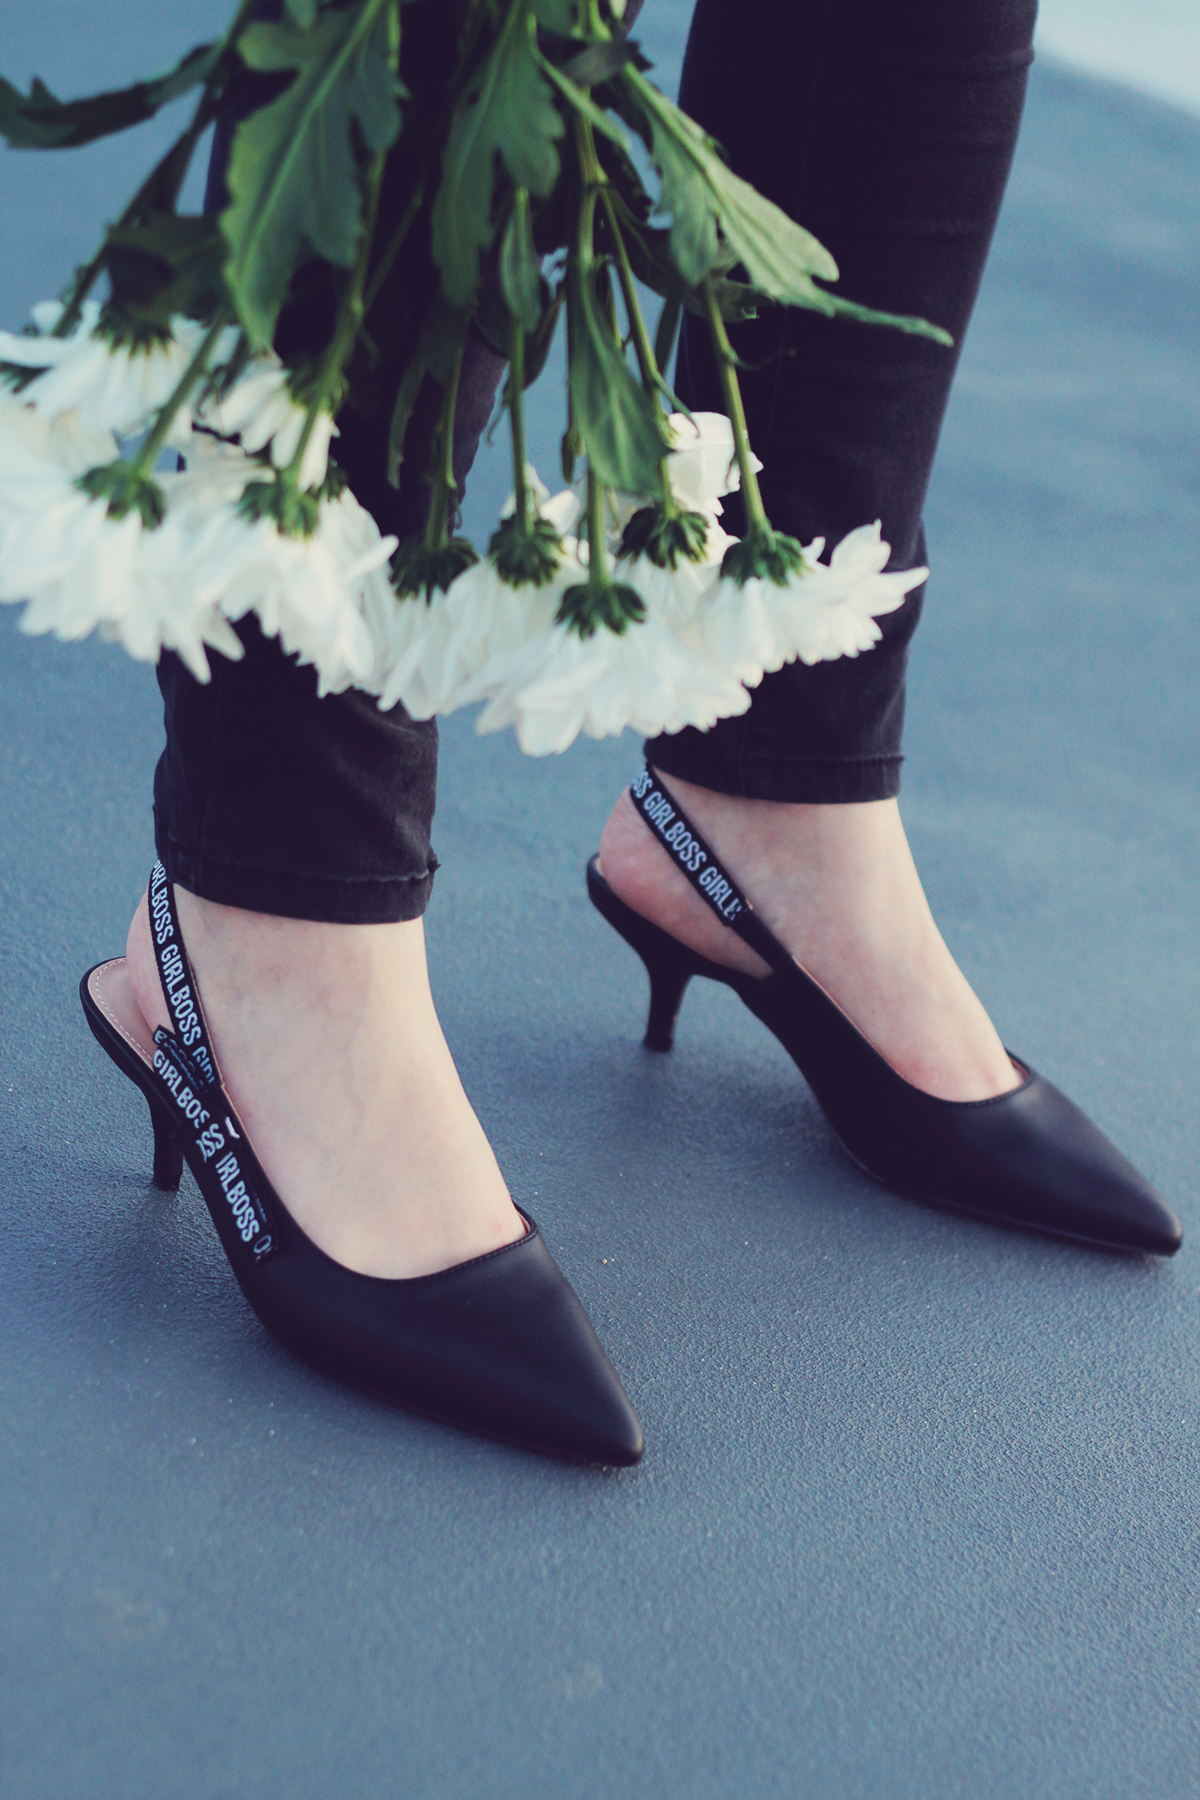 Vices girl boss shoes, white flowers, classic look, office look, summer style